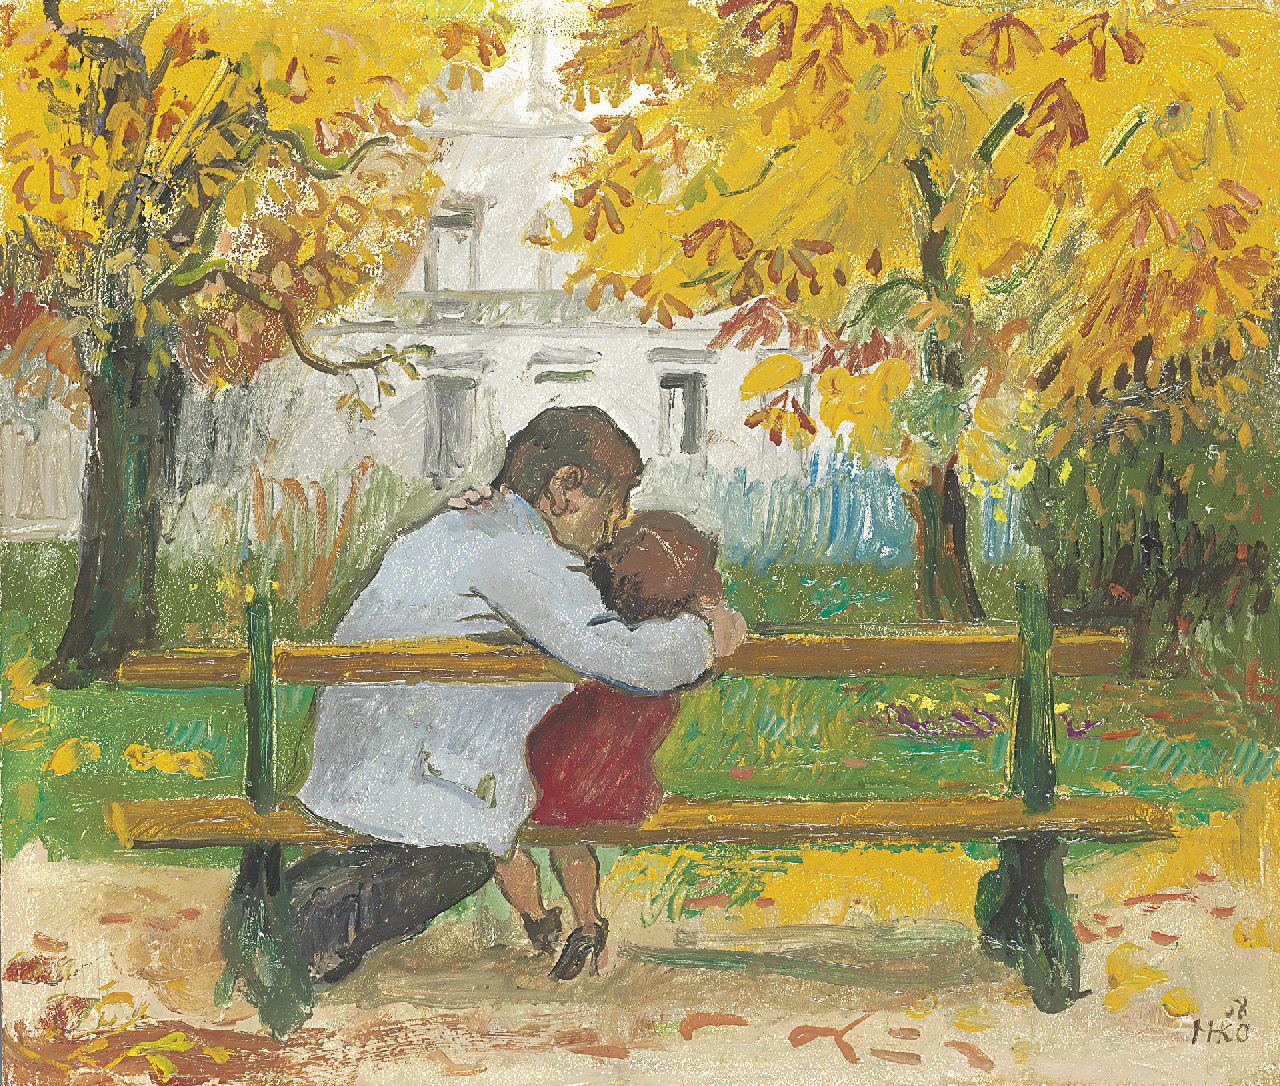 Kamerlingh Onnes H.H.  | 'Harm' Henrick Kamerlingh Onnes, Kissing couple in the park, oil on board 34.0 x 39.9 cm, signed l.r. with monogram and dated '58